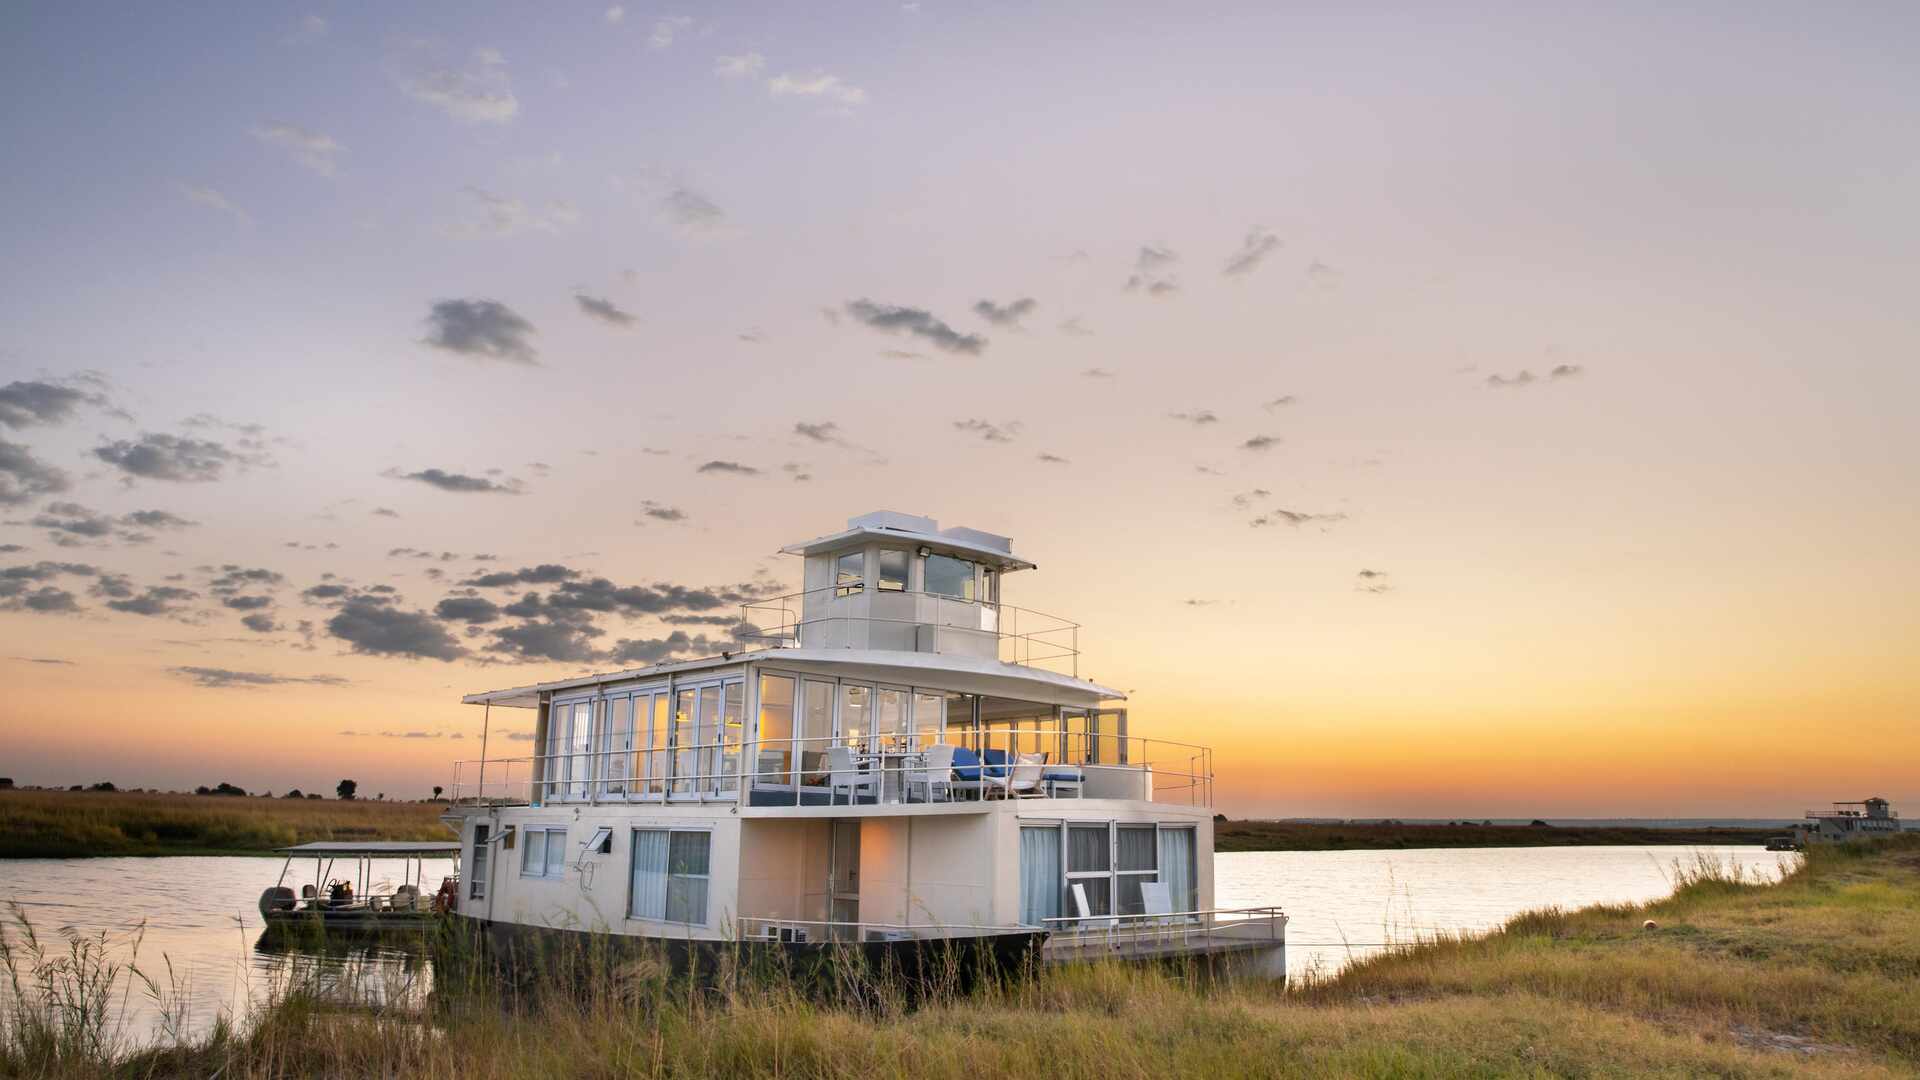 The Chobe Princess docked during a sunset